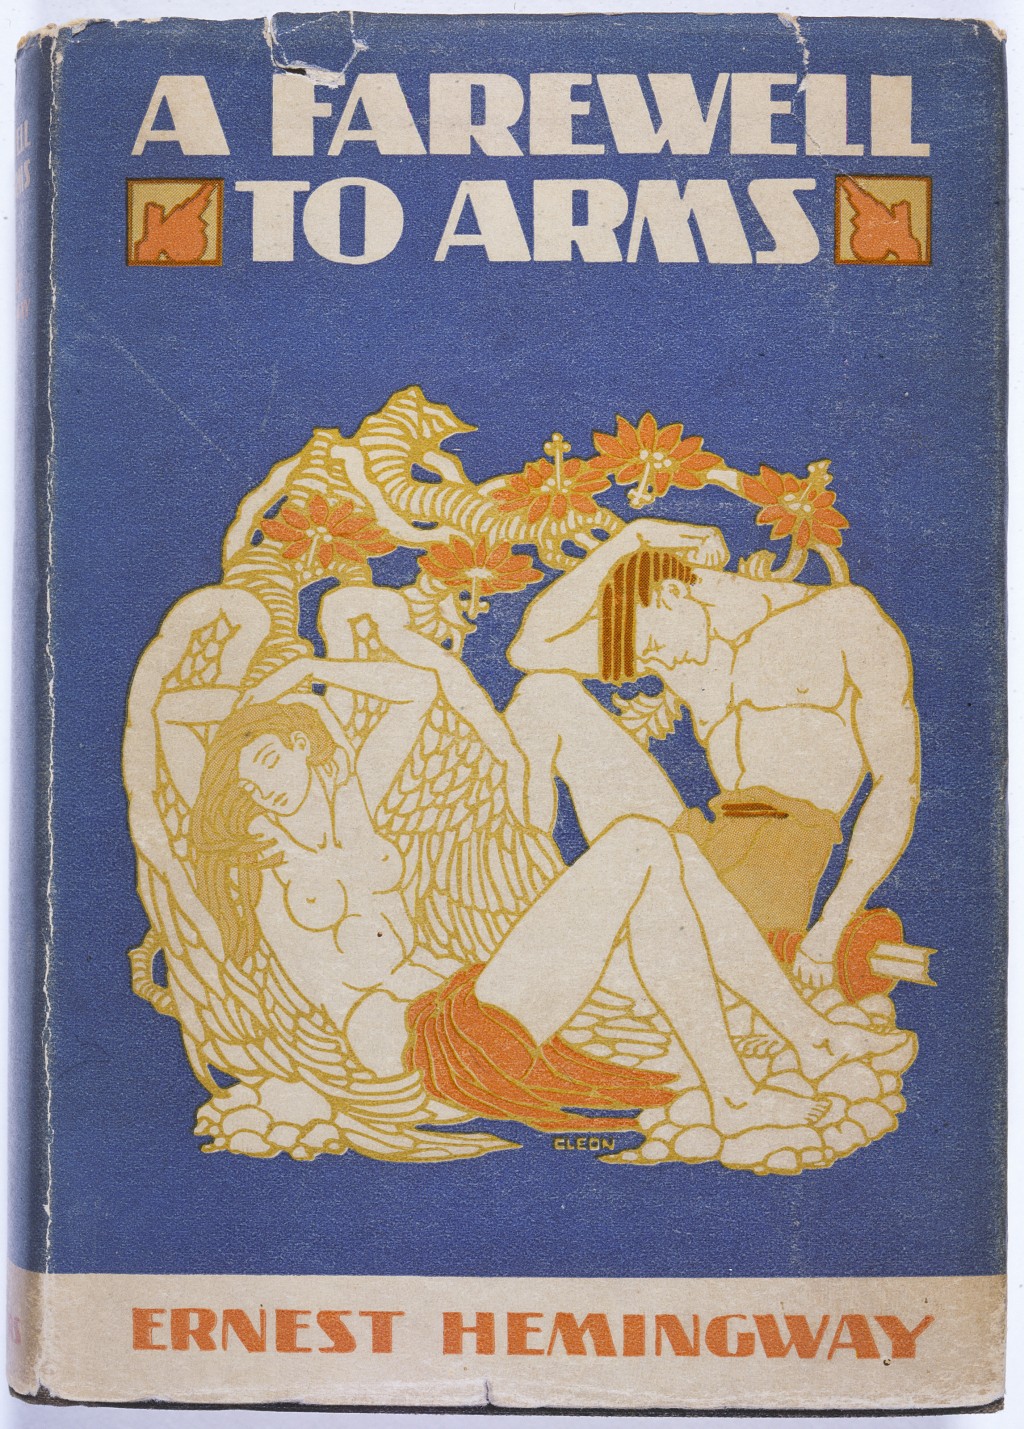 Ernest Hemingway: A Farewell to Arms, 1929 cover.